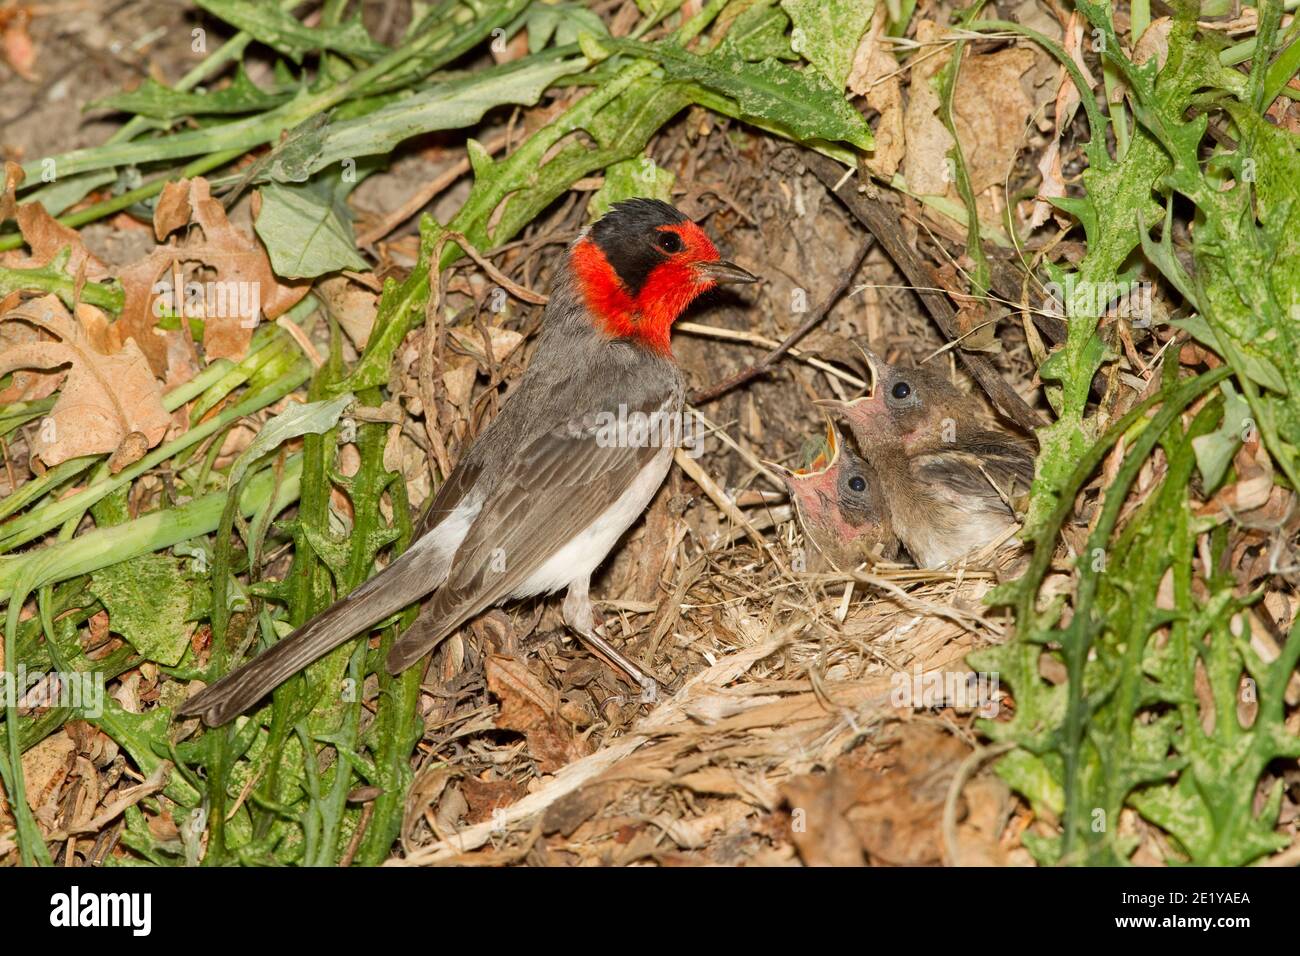 Red-faced Warbler, Cardellina rubrifrons, feeding nestlings. Stock Photo